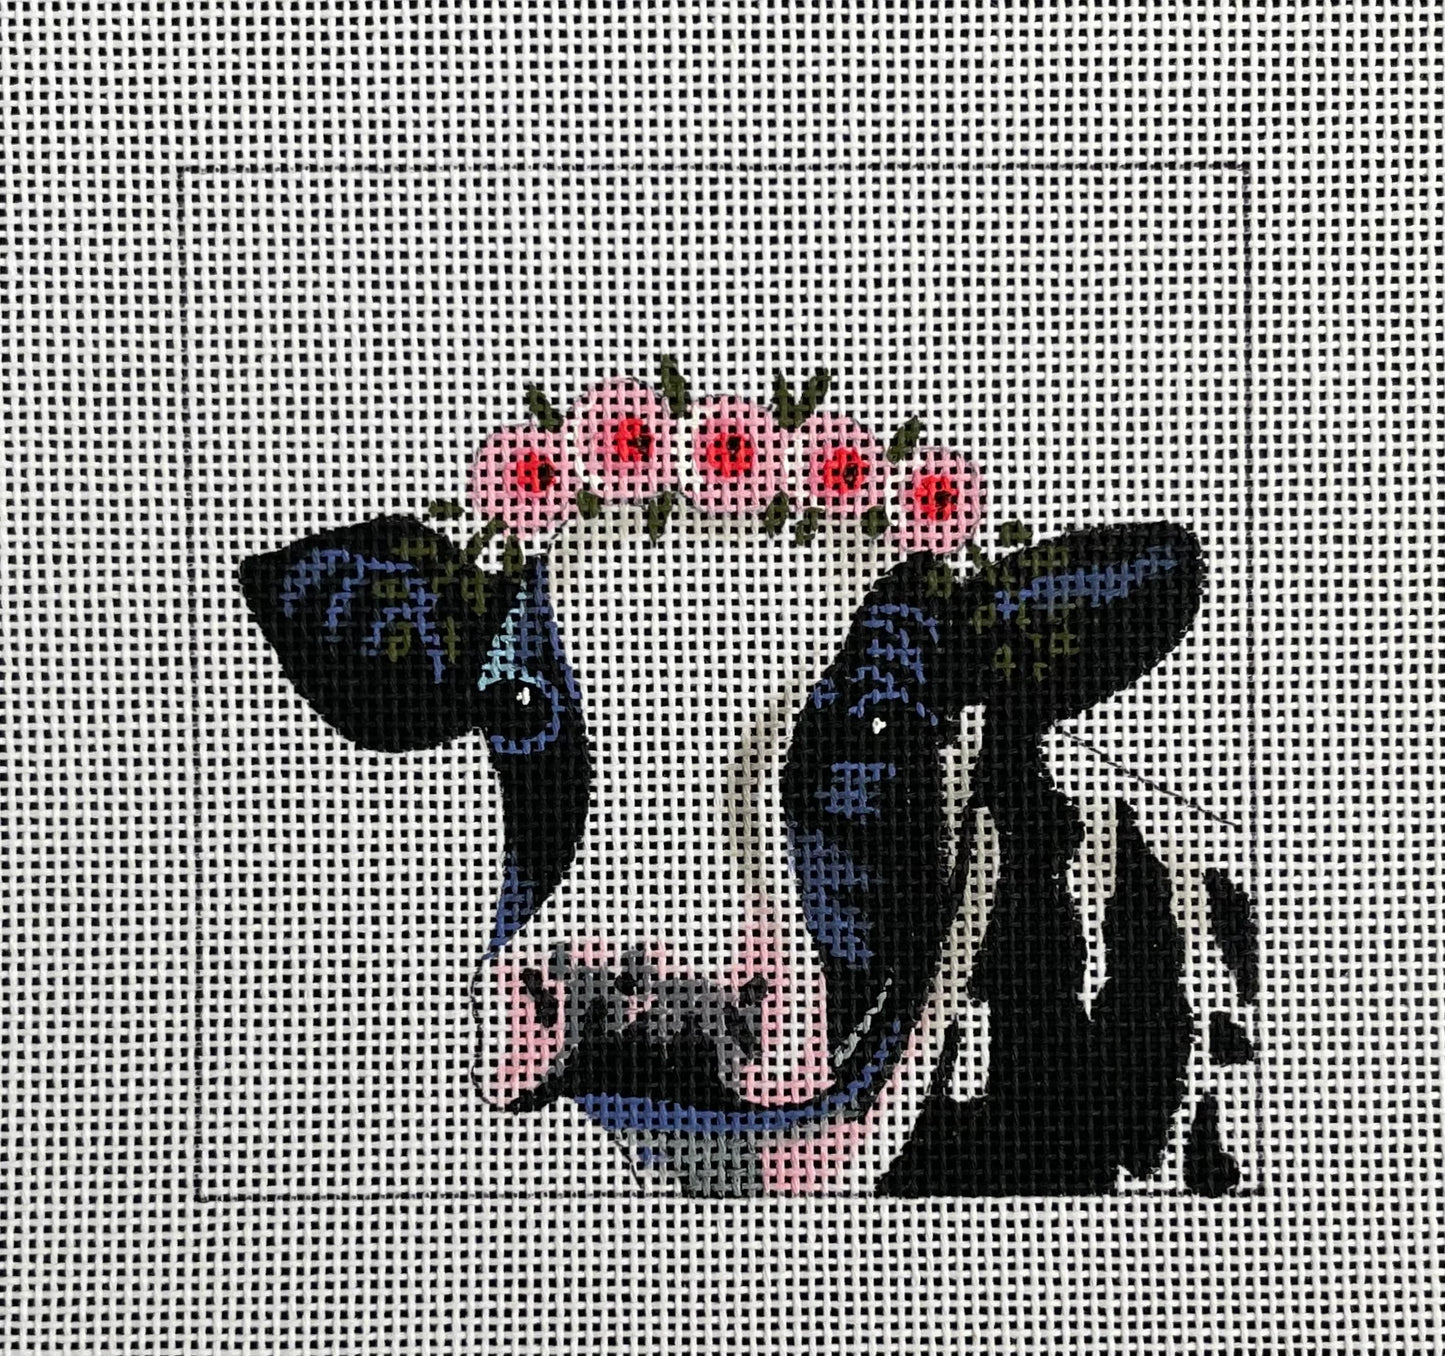 Cow with Flower Crown